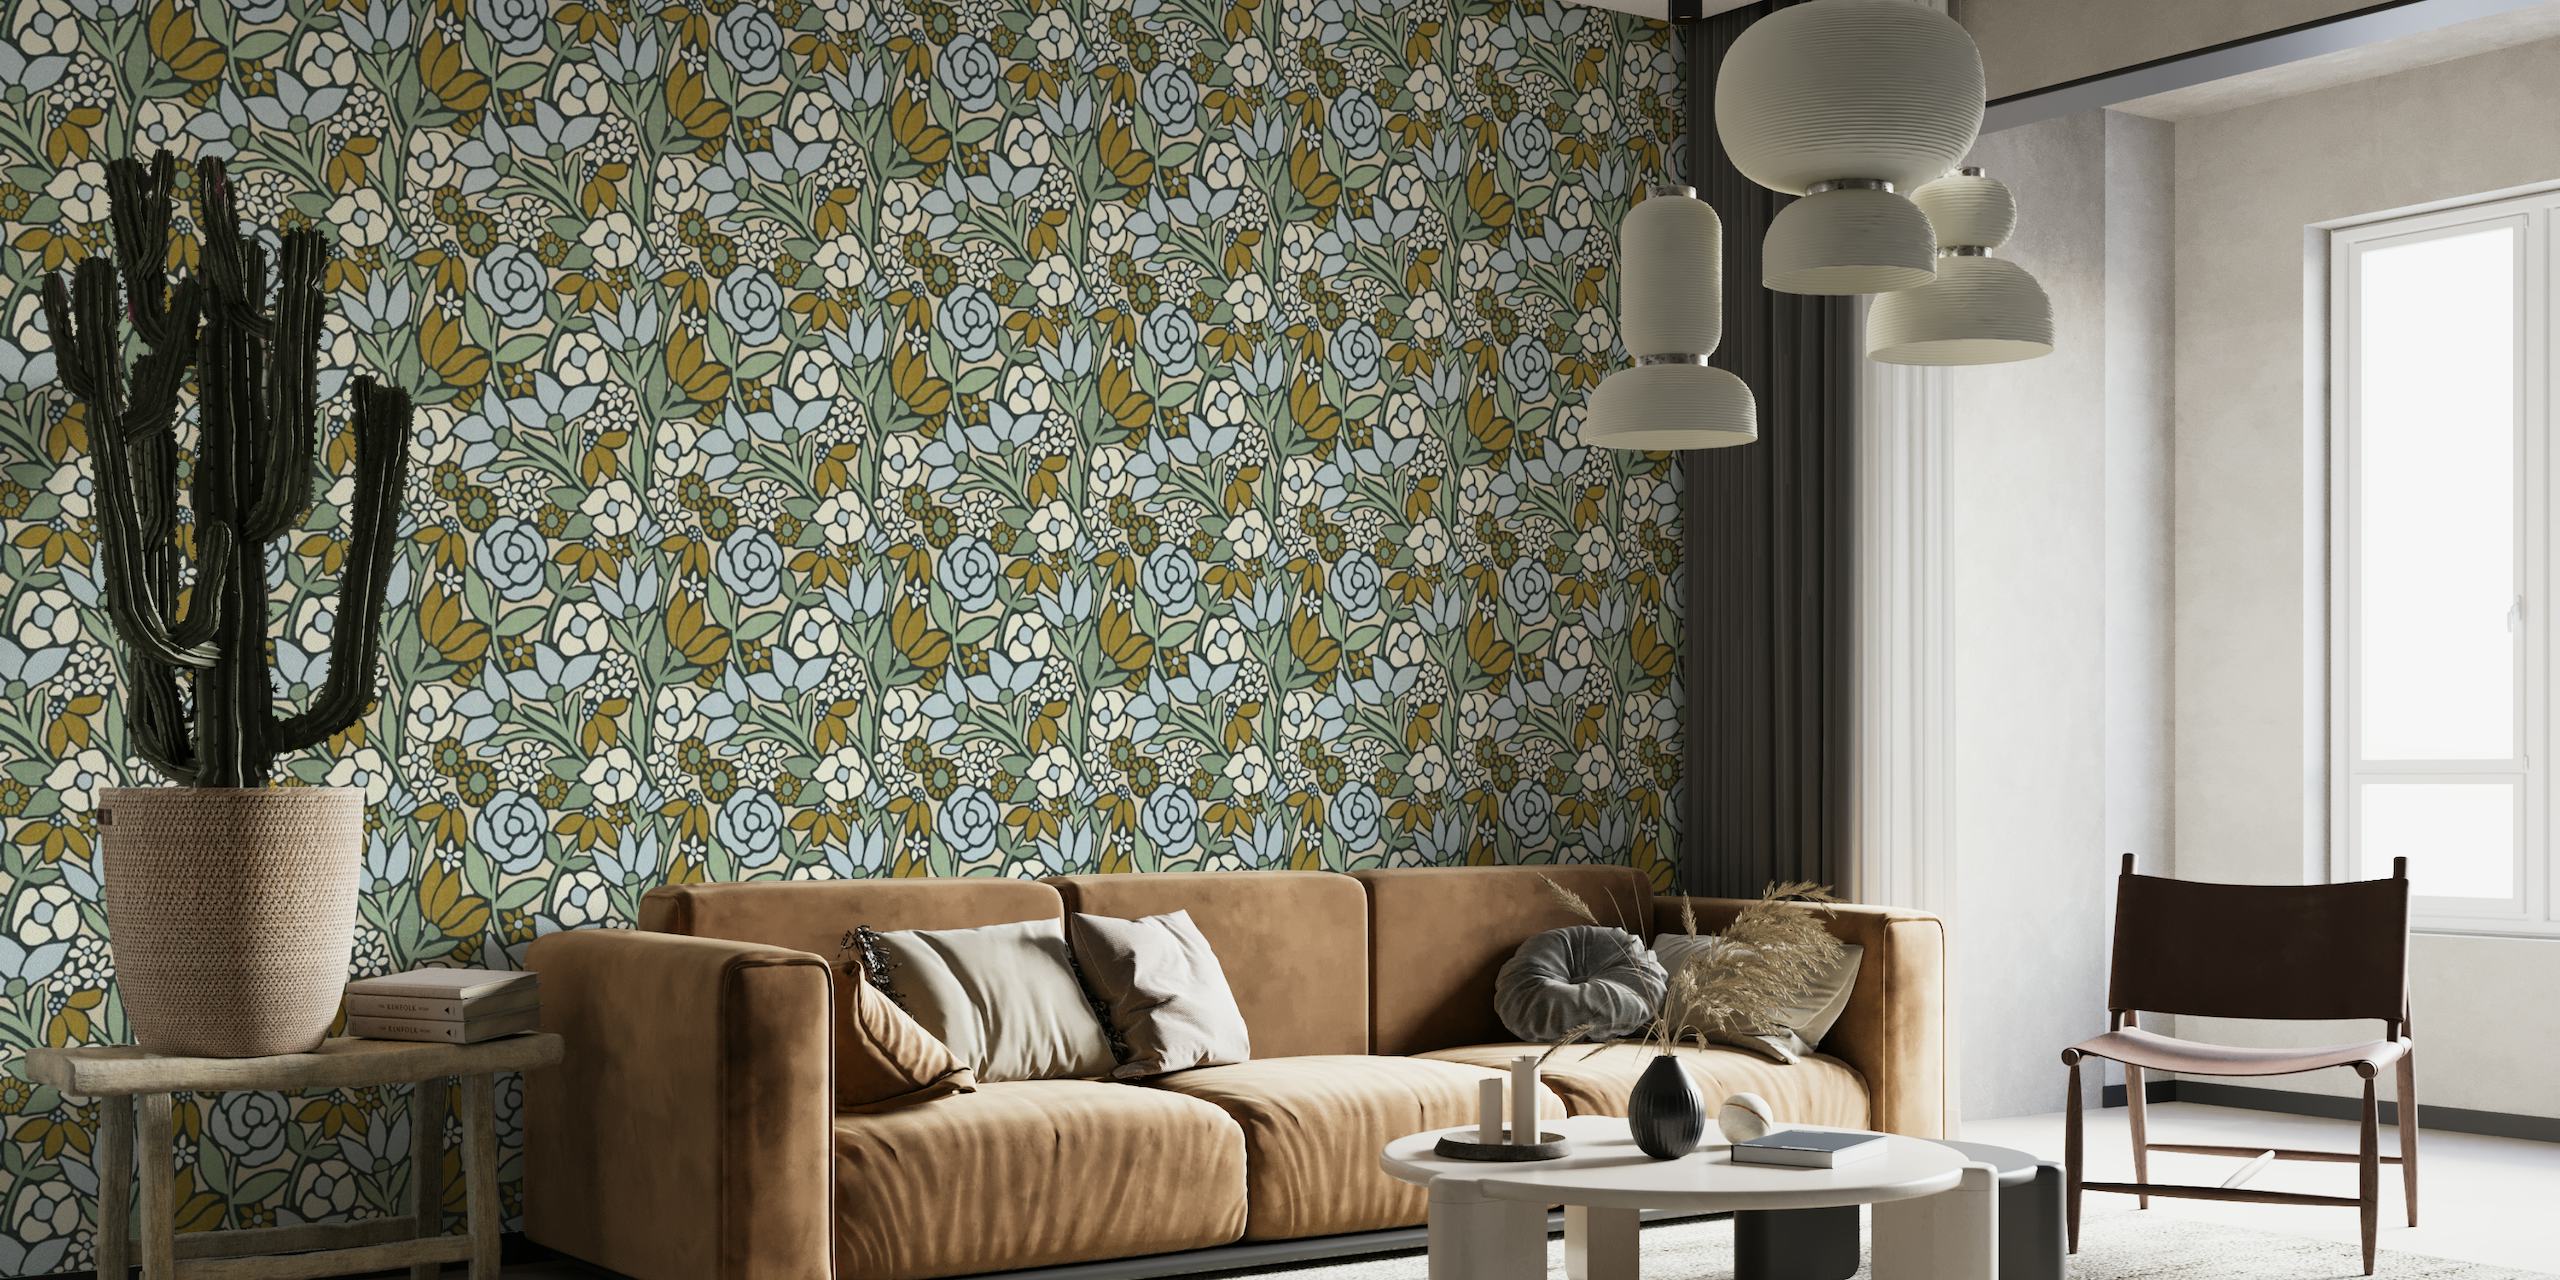 Elegant gold and blue floral wall mural design ‘Romilly’